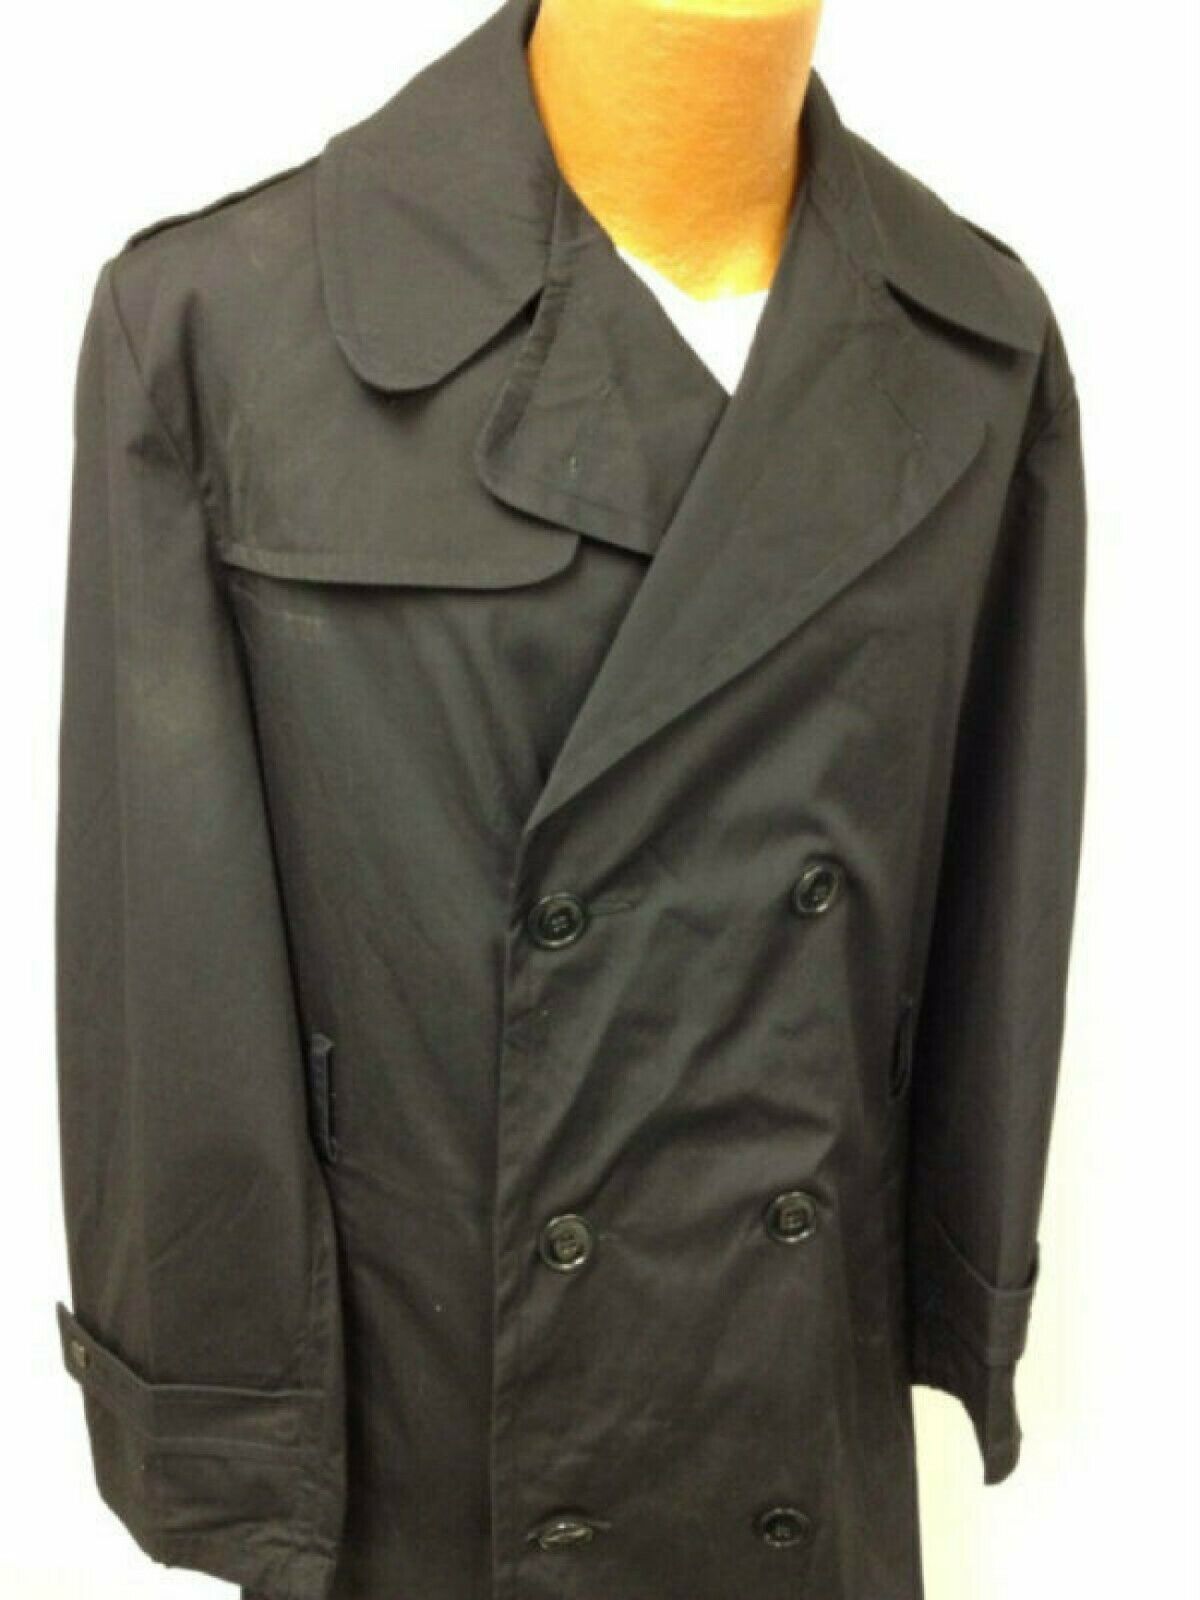 US ARMY MILITARY ISSUE COAT ALL WEATHER BLACK TRENCH MEN'S 40S JACKET OVERCOAT